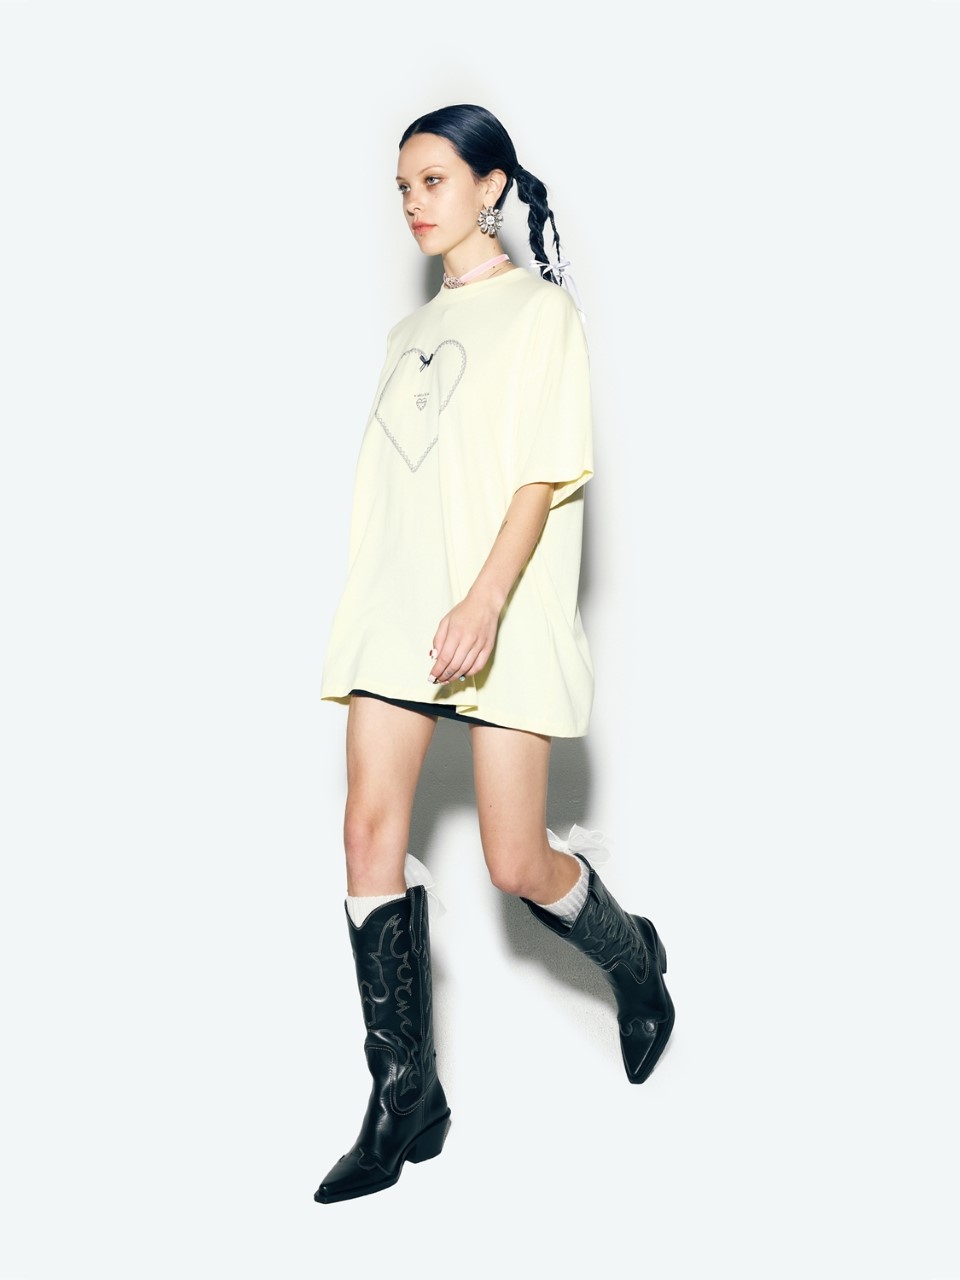 LACE HEART OVERSIZED T-SHIRT YELLOW - 에즈이프캘리(asifCALIE)